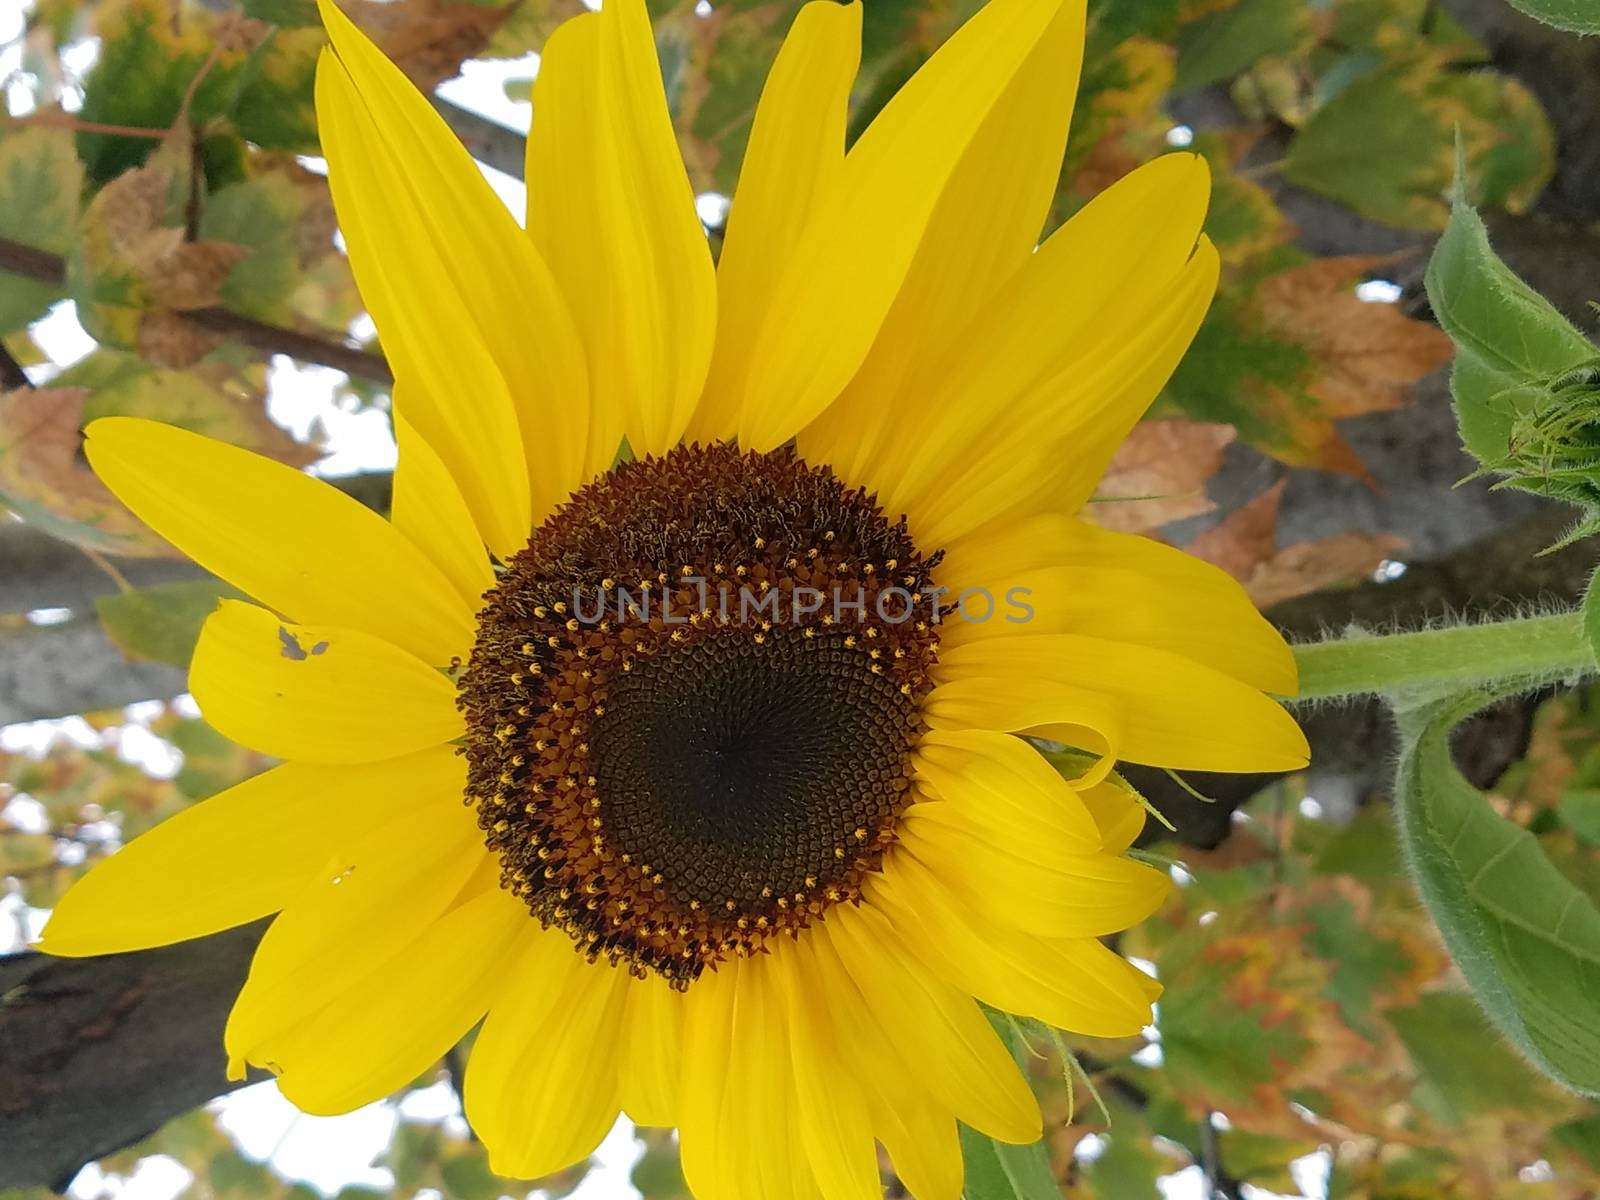 plant with yellow flower petals blooming in spring by stockphotofan1